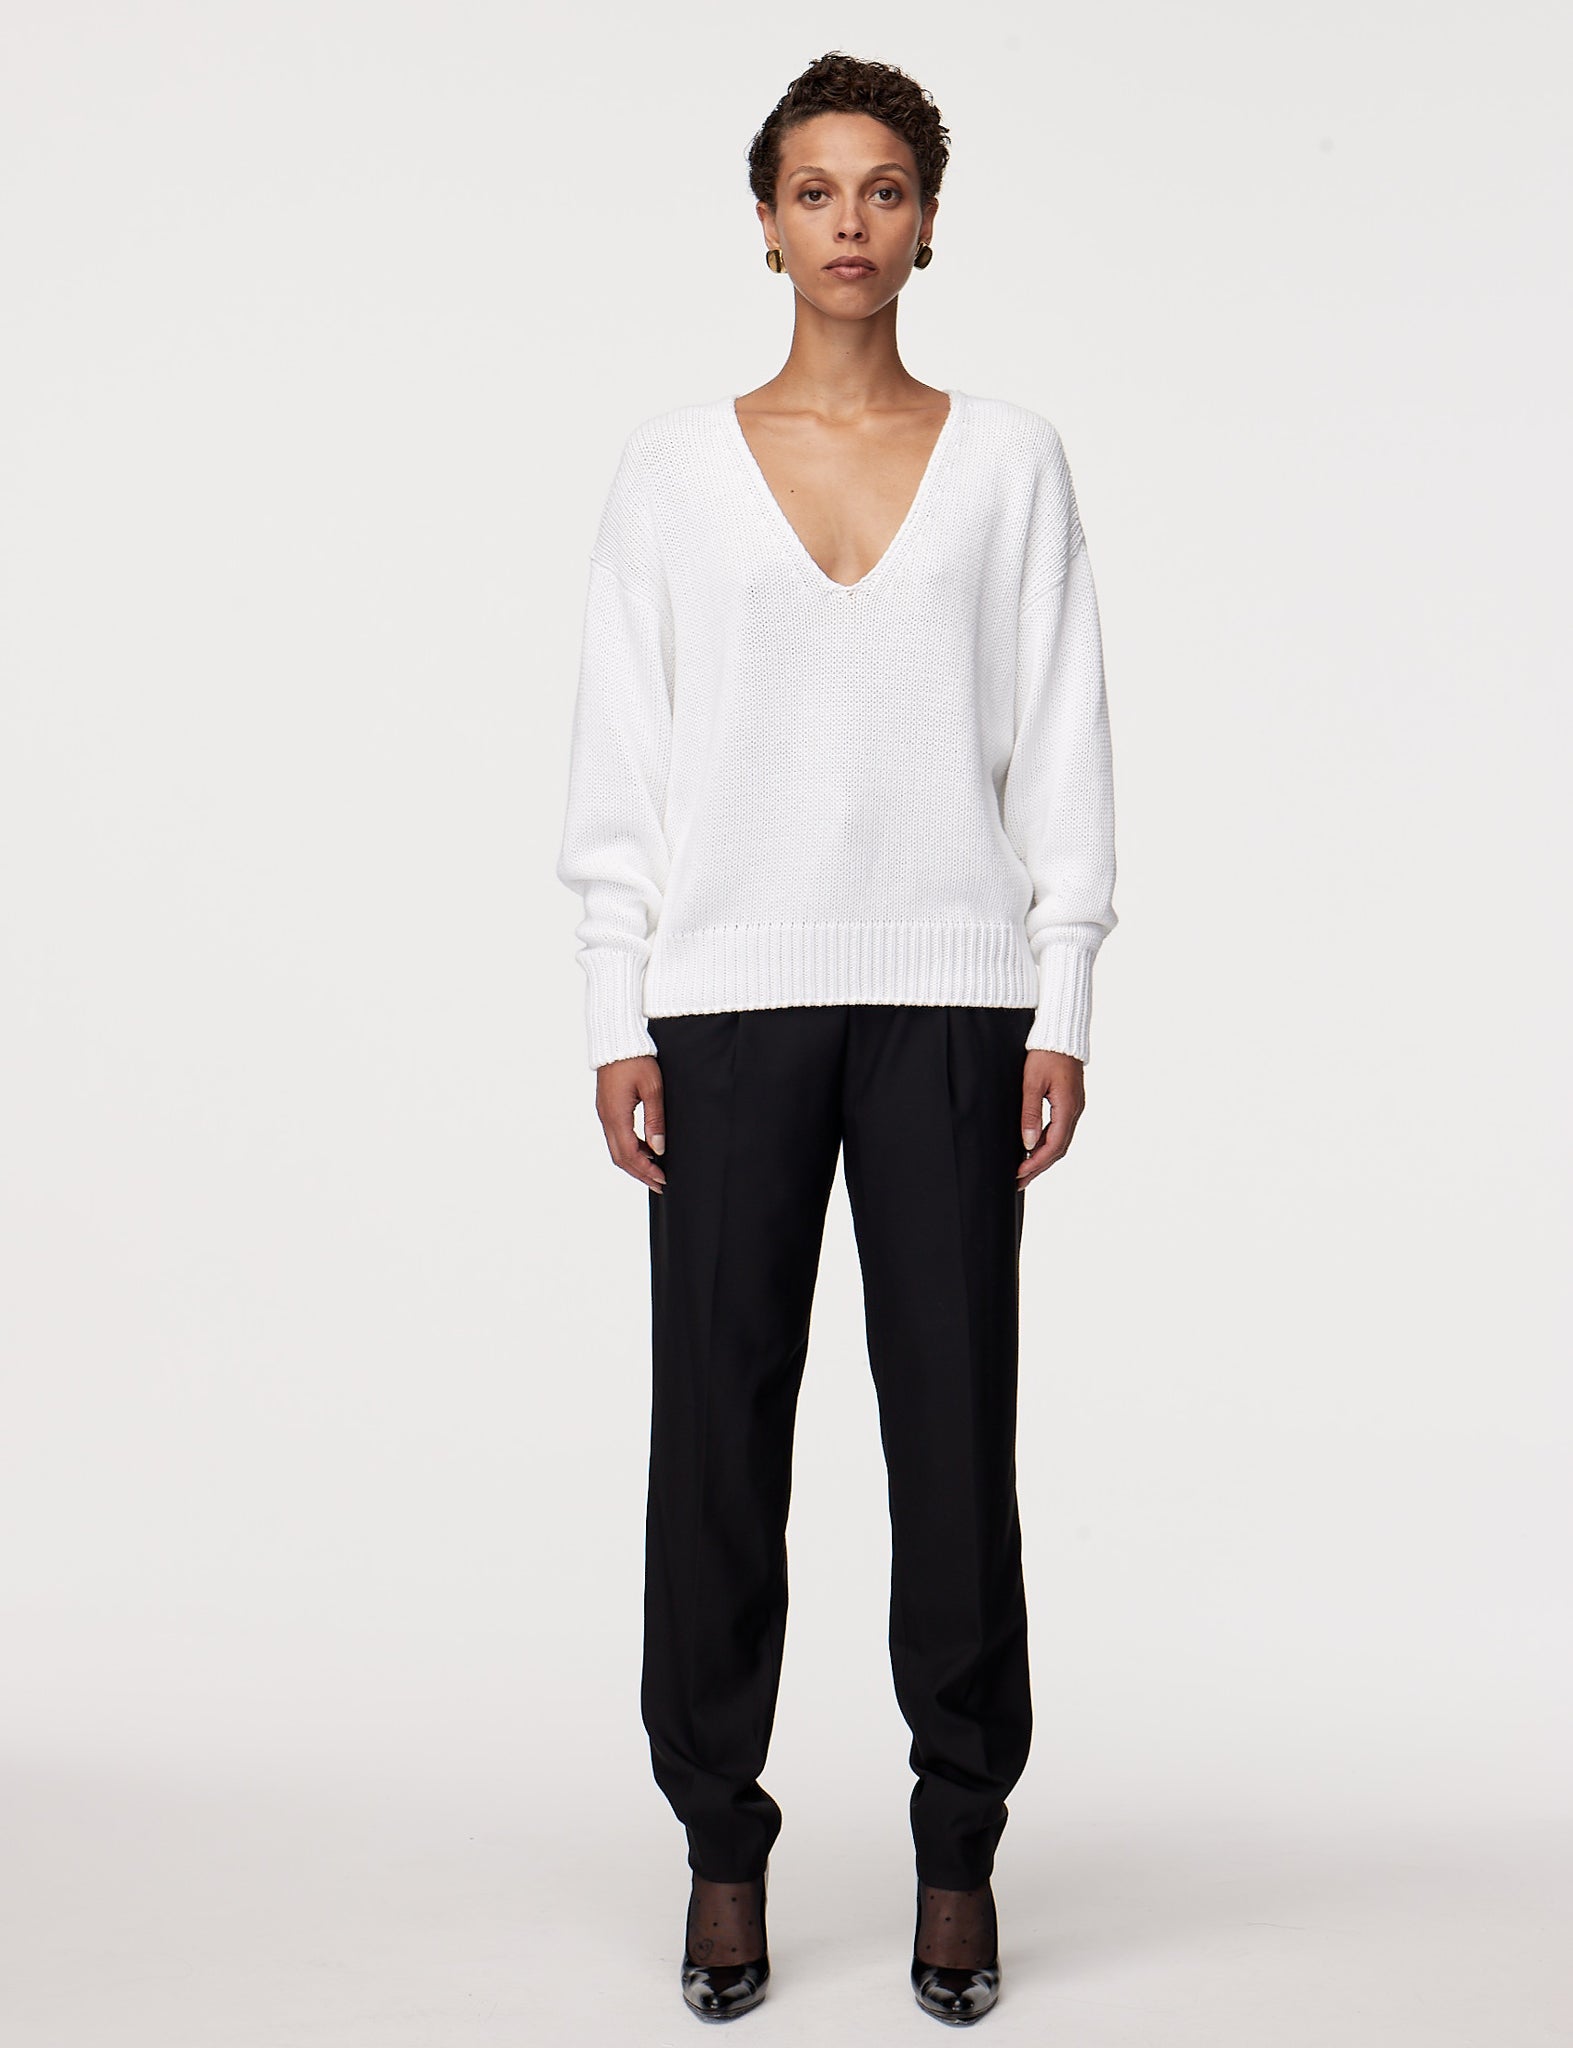 Another Tomorrow Draped Knit V-neck Sweater In White